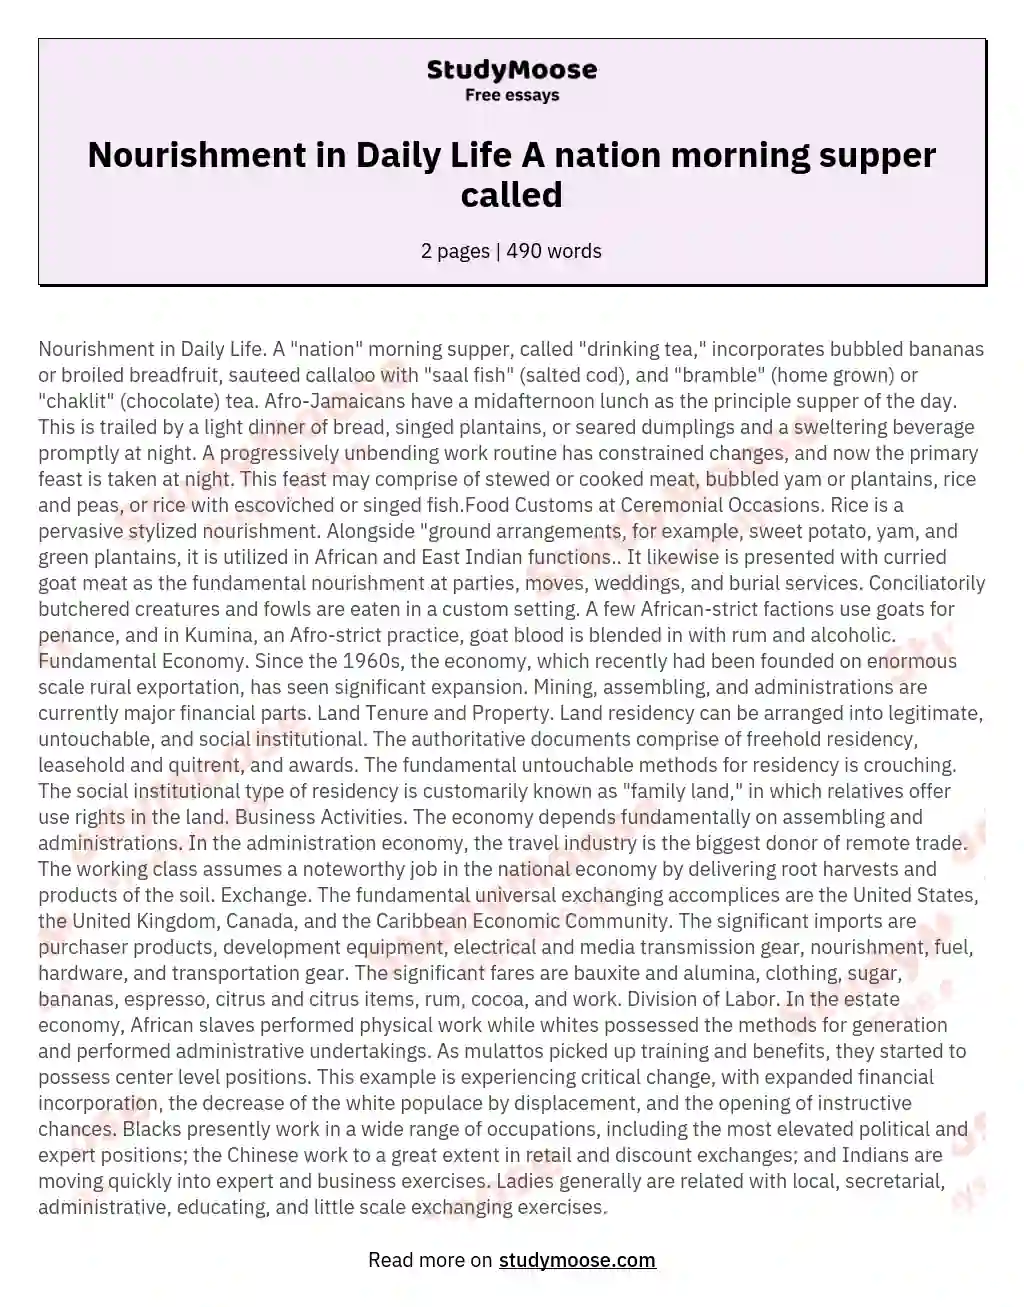 Nourishment in Daily Life A nation morning supper called essay